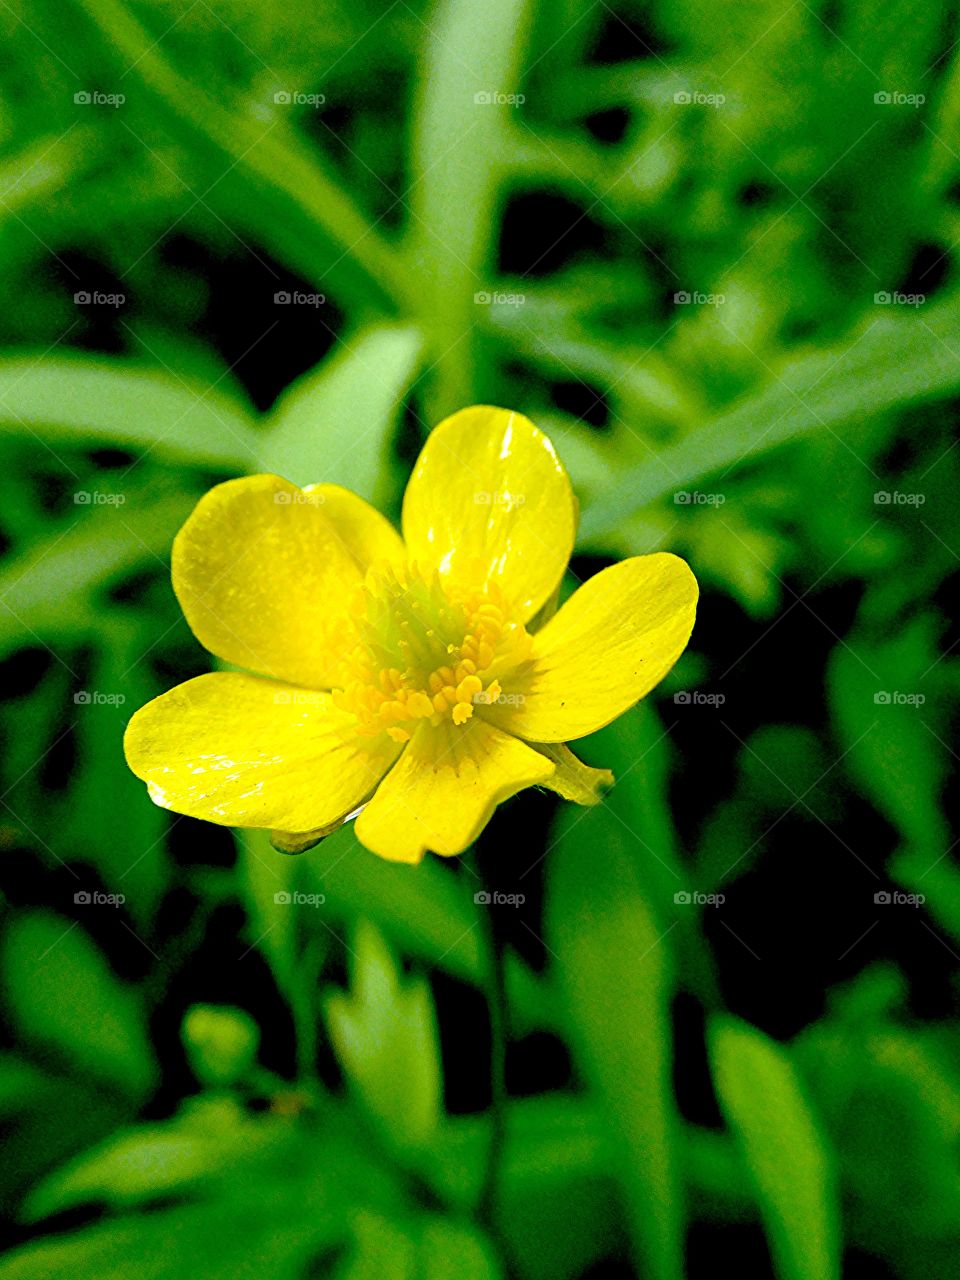 Buttercup in tionesta forest warren pa USA . A common flower called a buttercup in macro